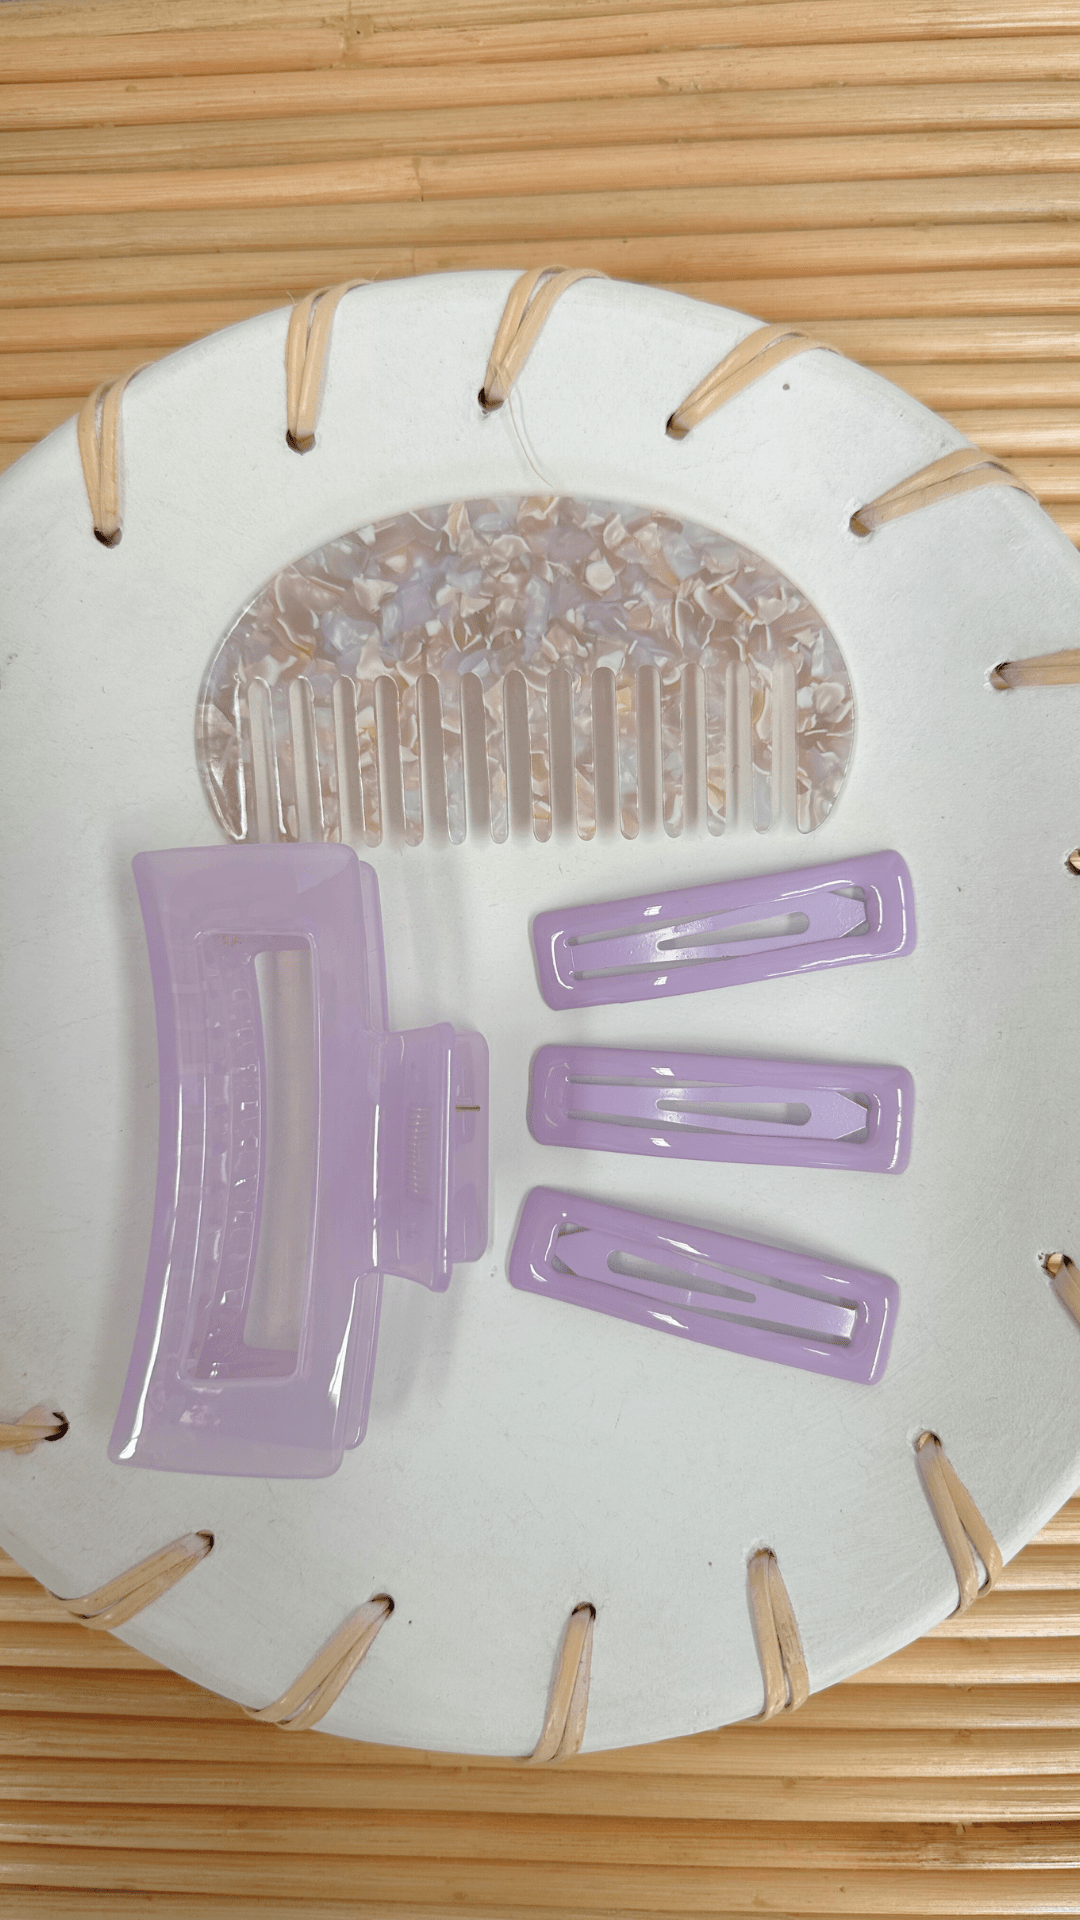 THE ISLAND RECTANGLE HAIR CLIPS - PURPLE PACK - HIBISCUS THE LABEL - Black Salt Co